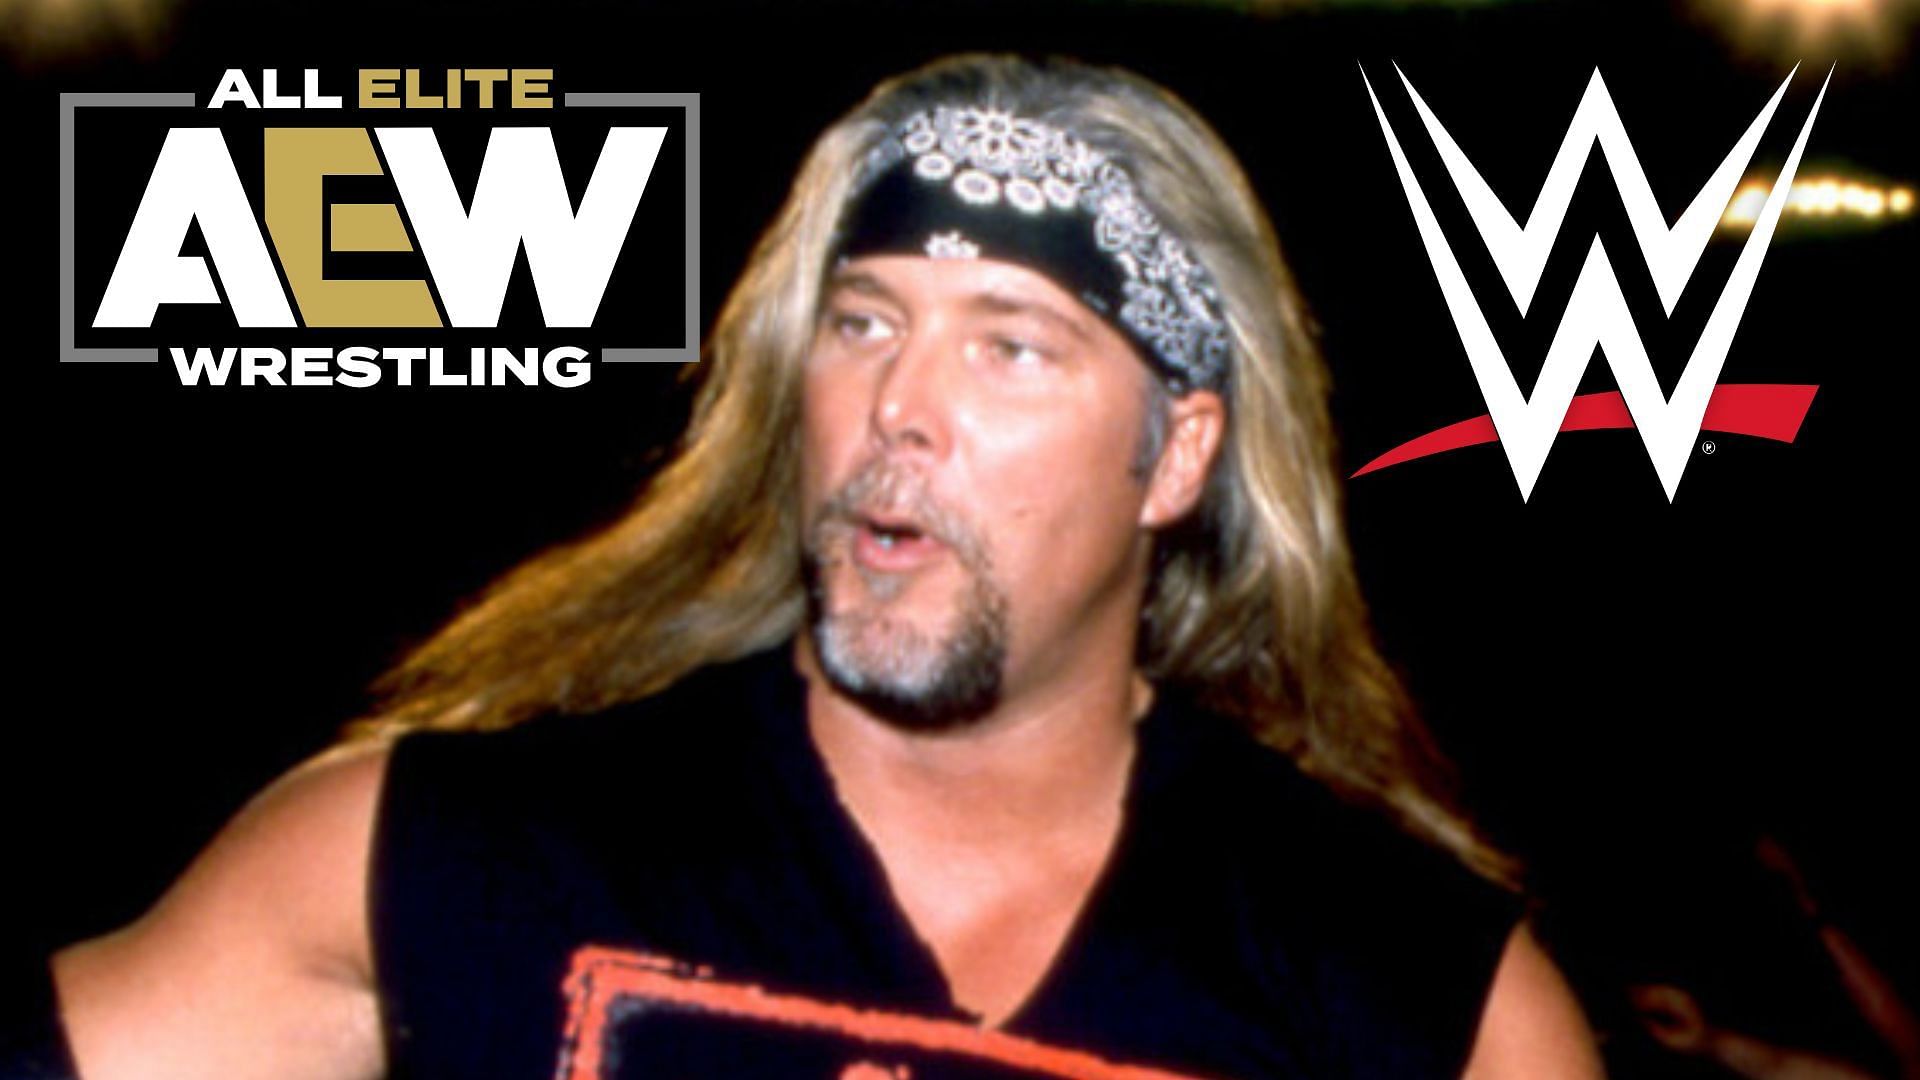 Kevin Nash has weighed in on AEW and WWE competing against each other